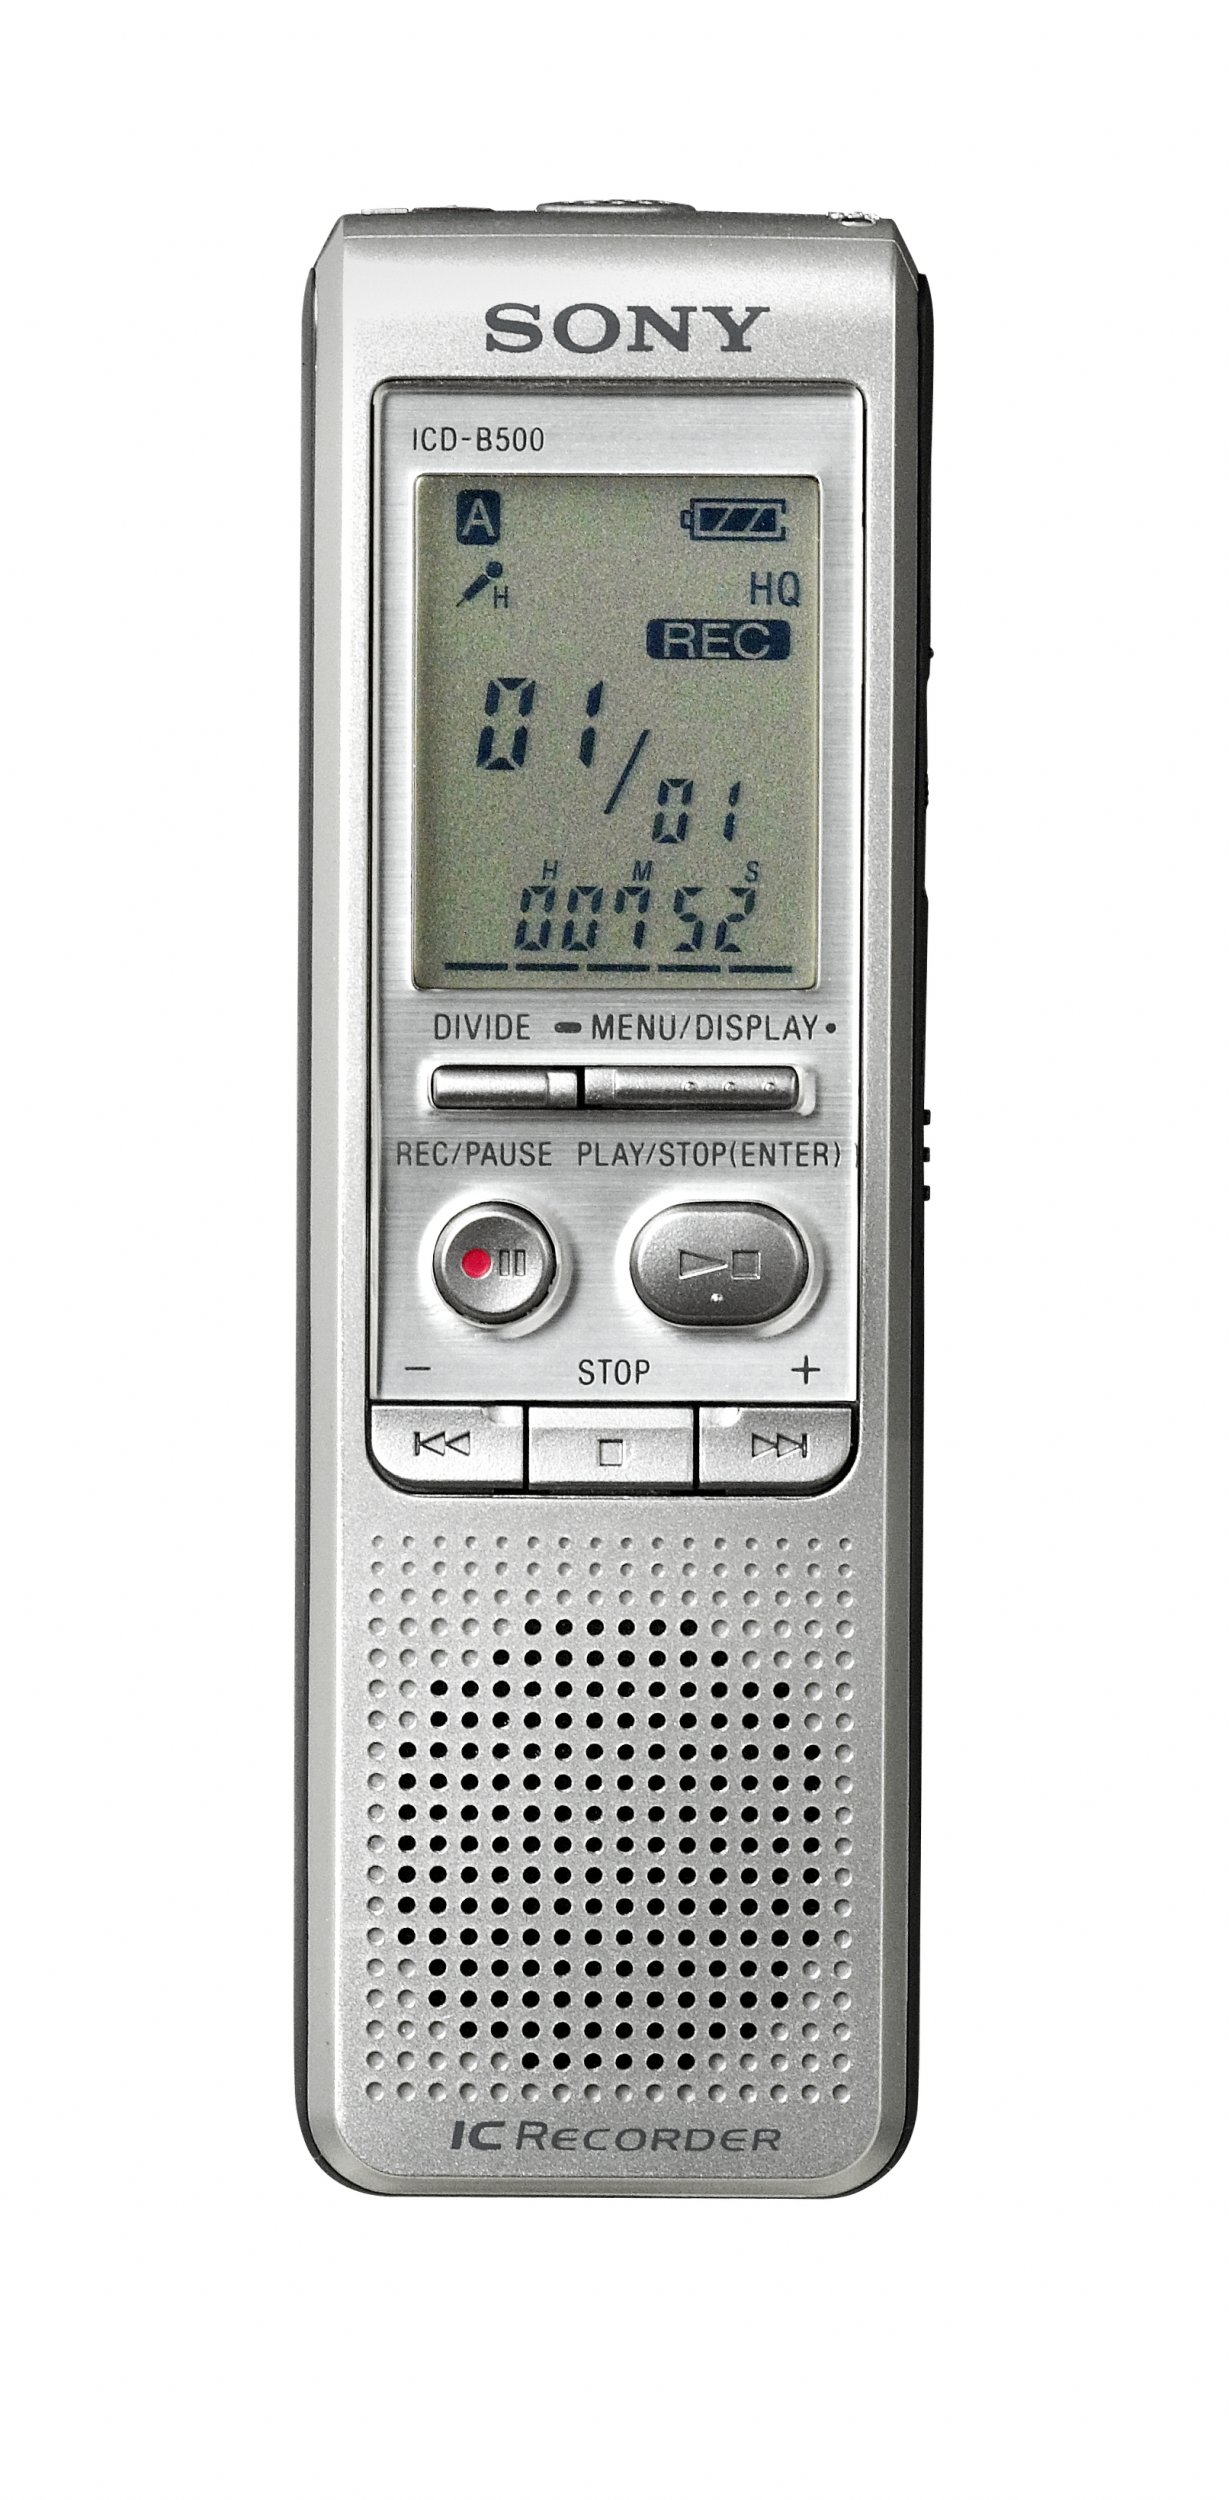 Sony ICD-B500 Digital Voice Recorder with 256 MB Built-in Flash Memory